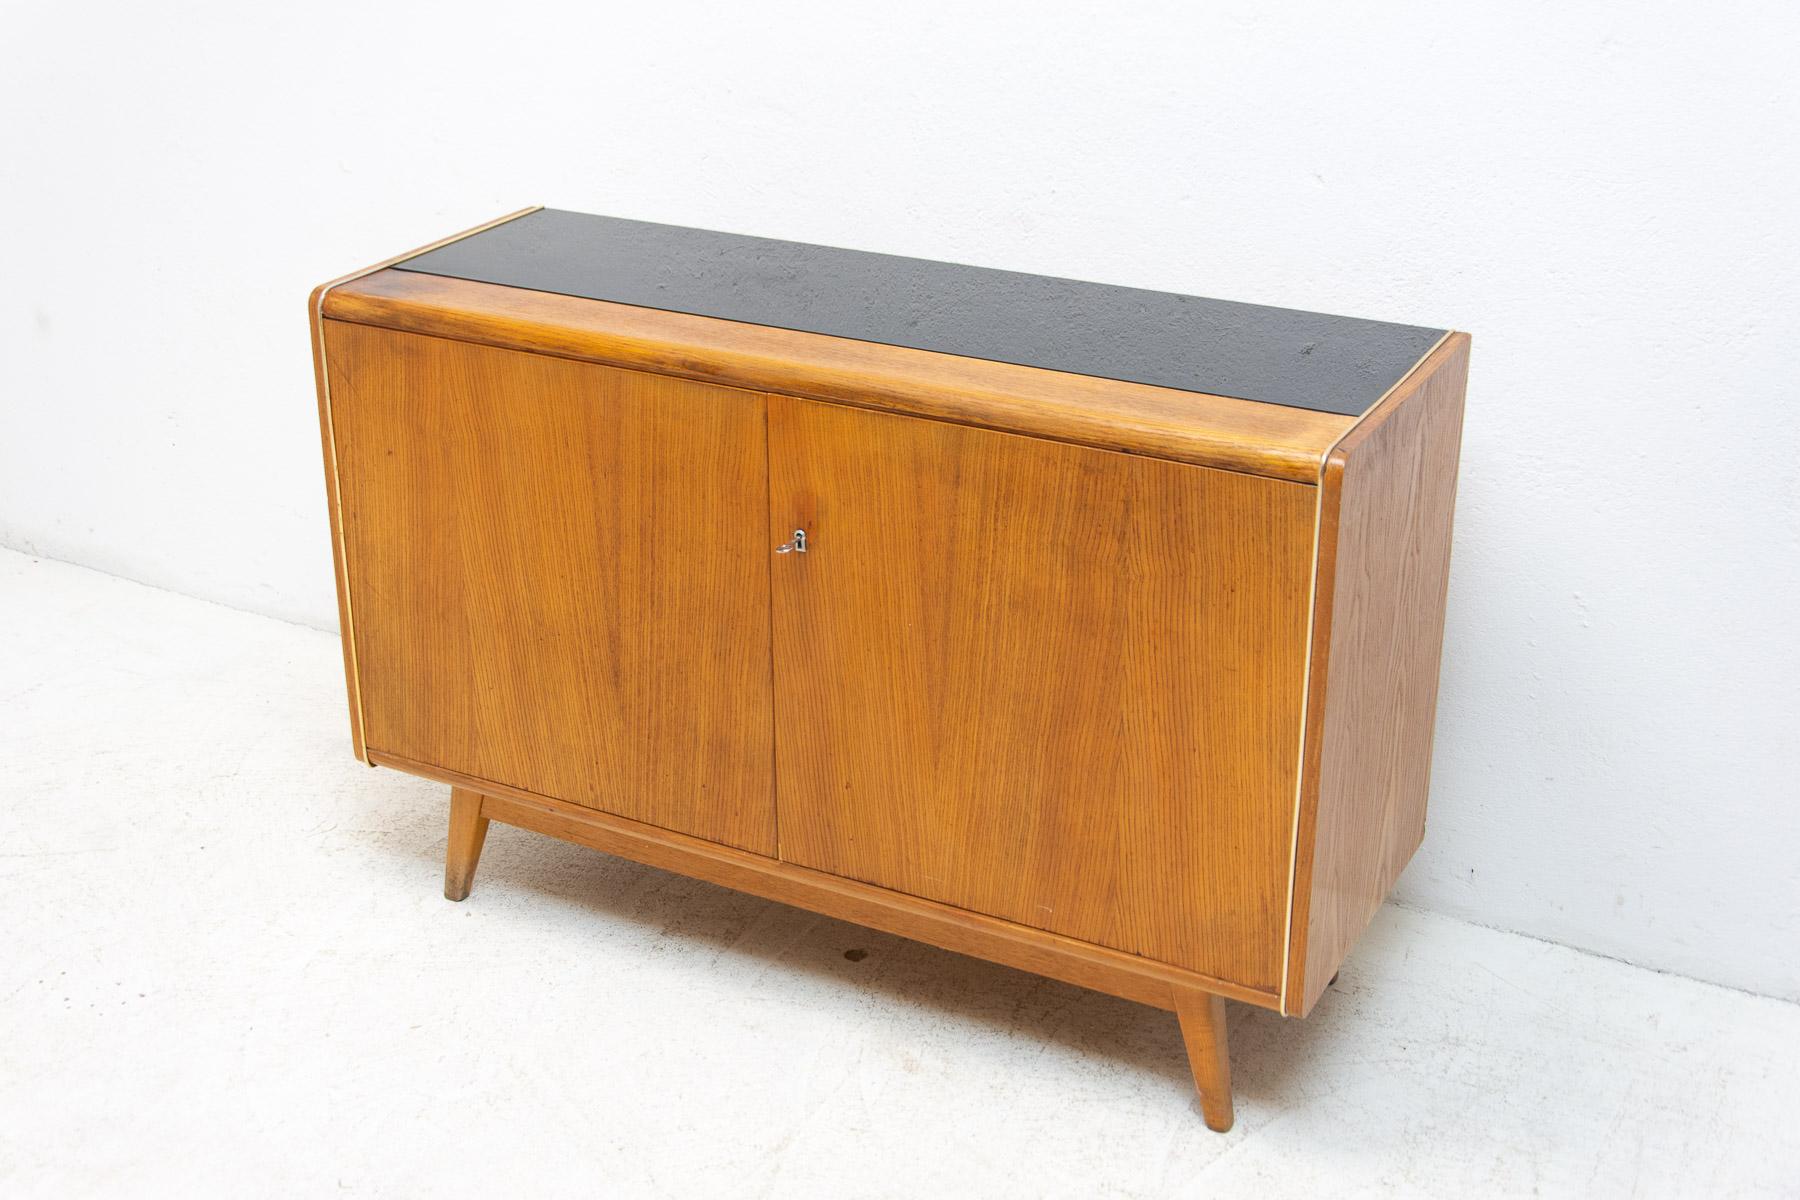 Mid-century dresser designed by Hubert Nepožitek & Bohumil Landsman for Jitona in the 1970´s.
It was made as a part of living room sector model U-372386. Made in Czechoslovakia.
In good preserved Vintage condition, showing signs of age and